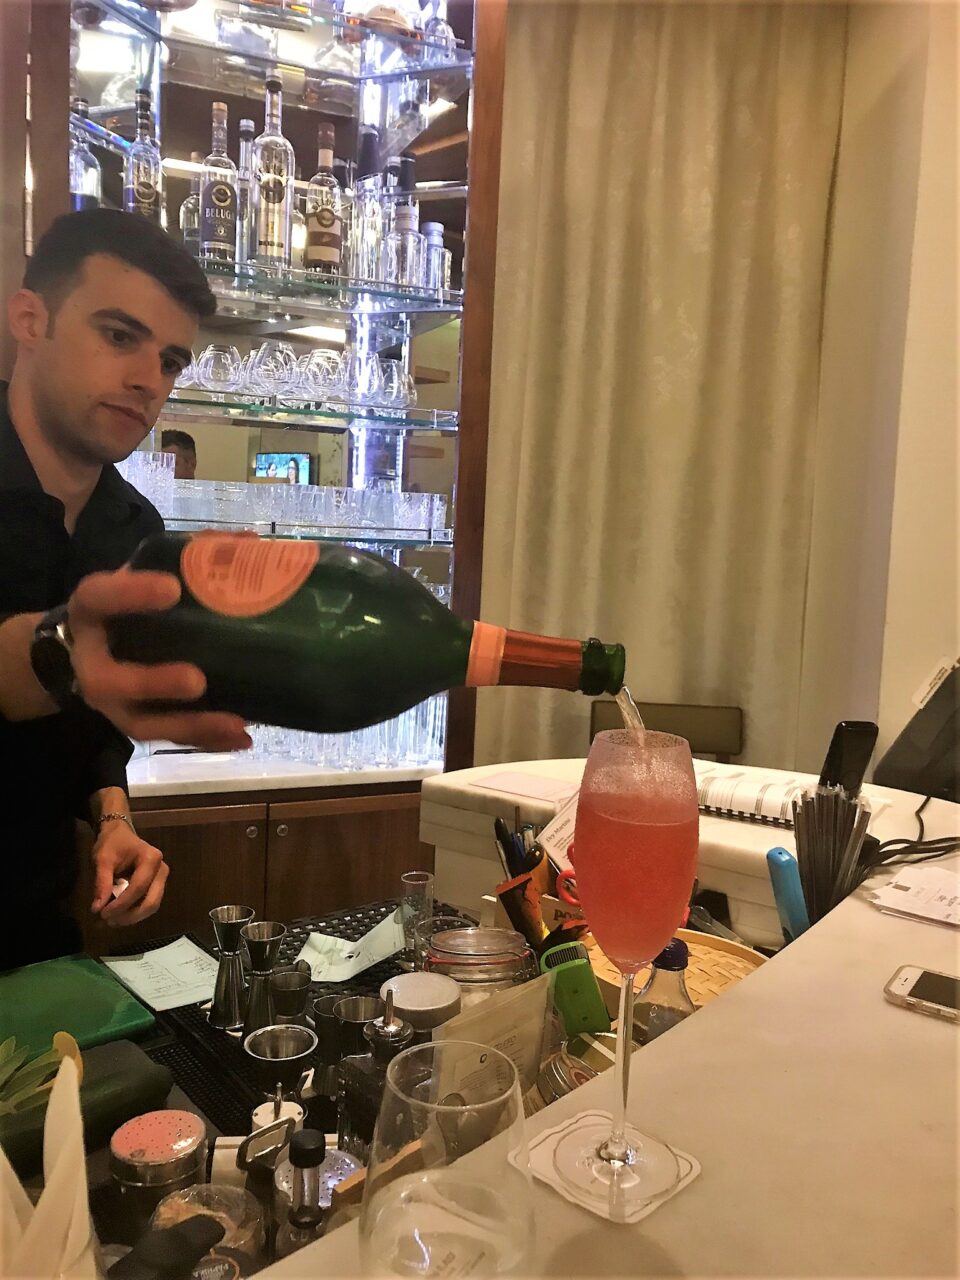 The barman finished off Roving Reporters cocktail